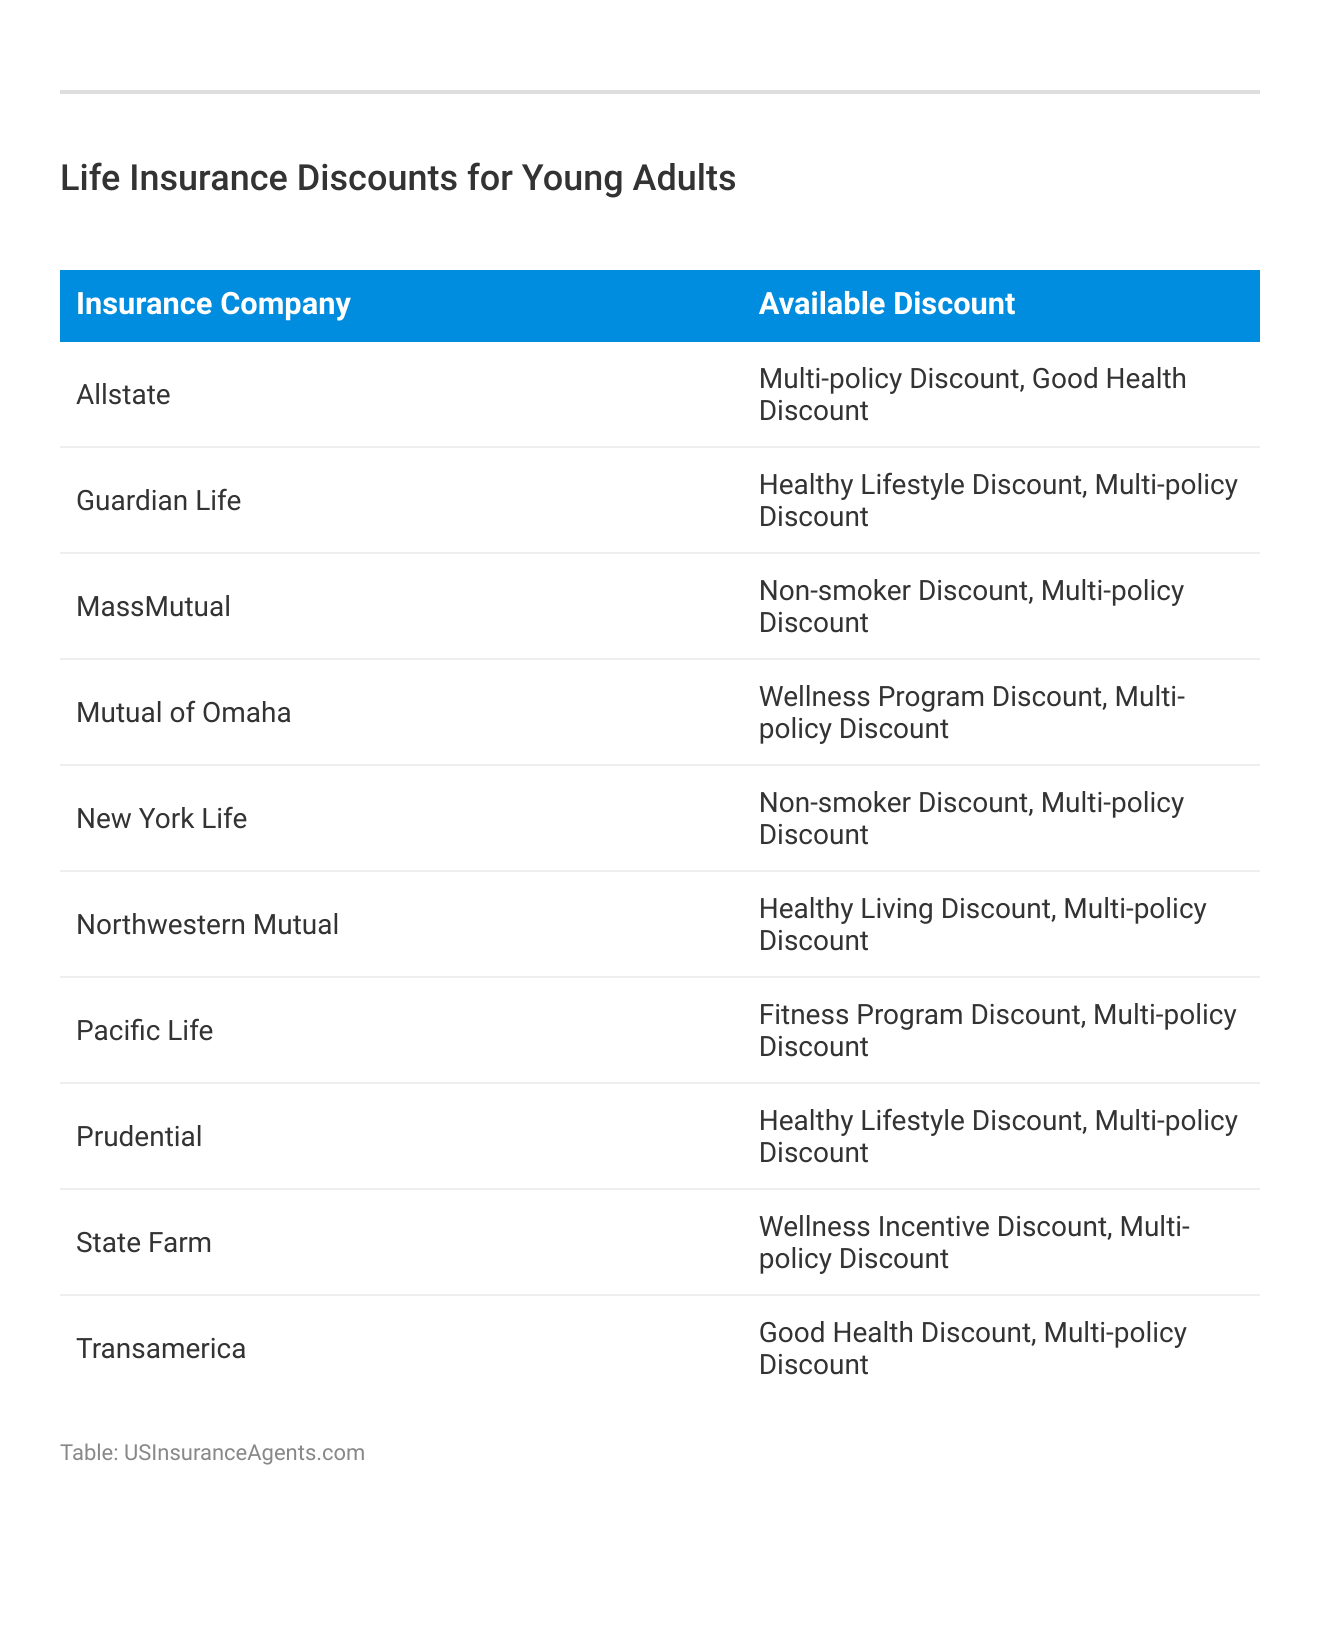 <h3>Life Insurance Discounts for Young Adults</h3>